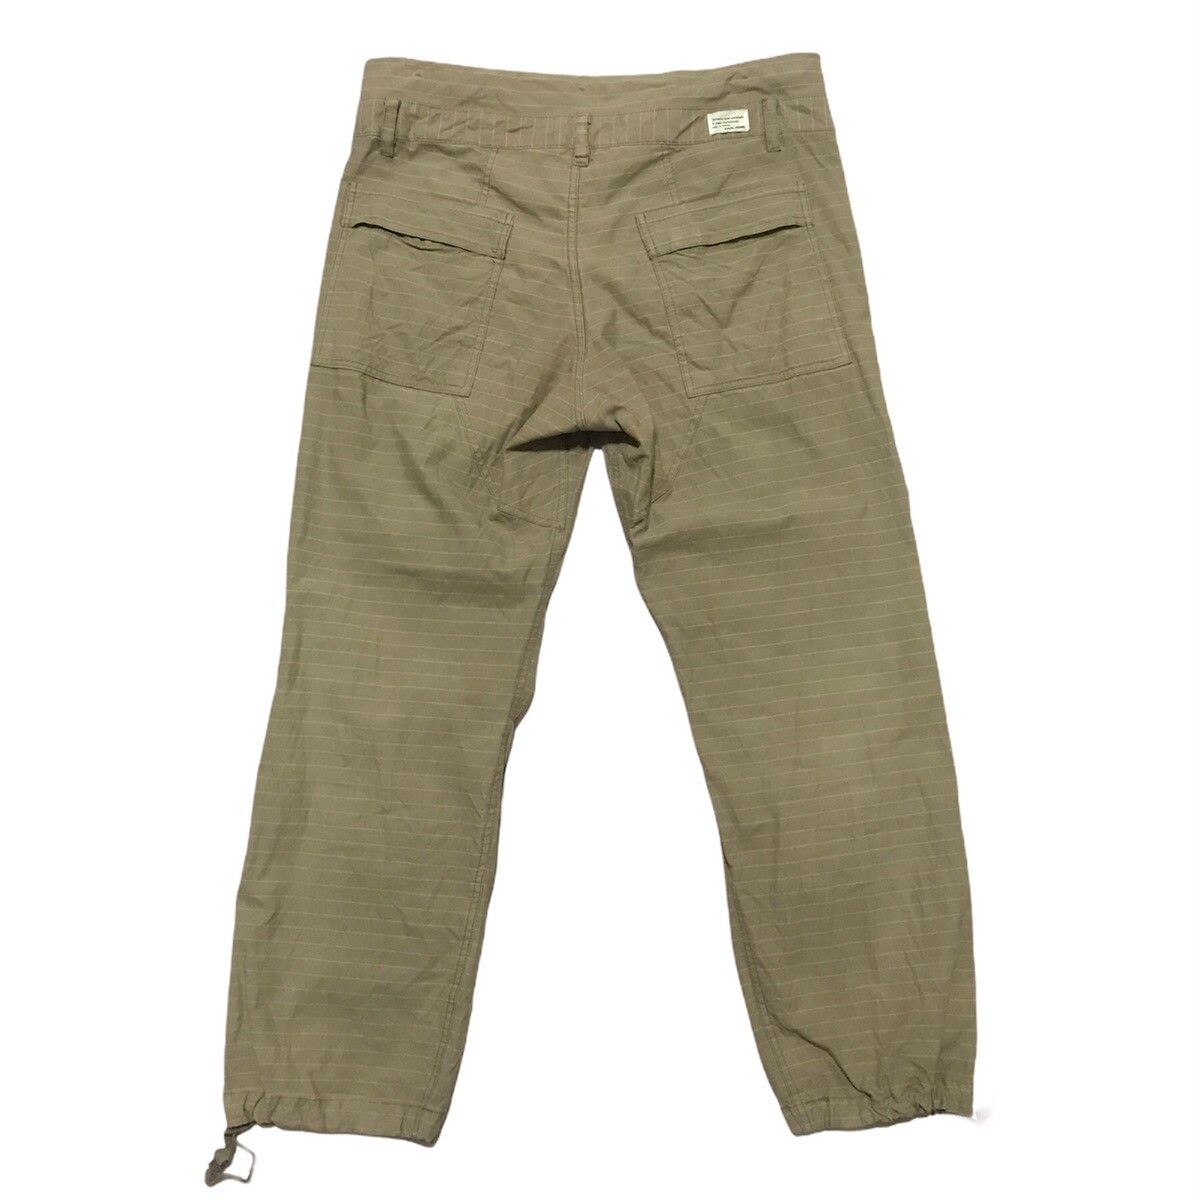 Final Home Military trouser pants - 6